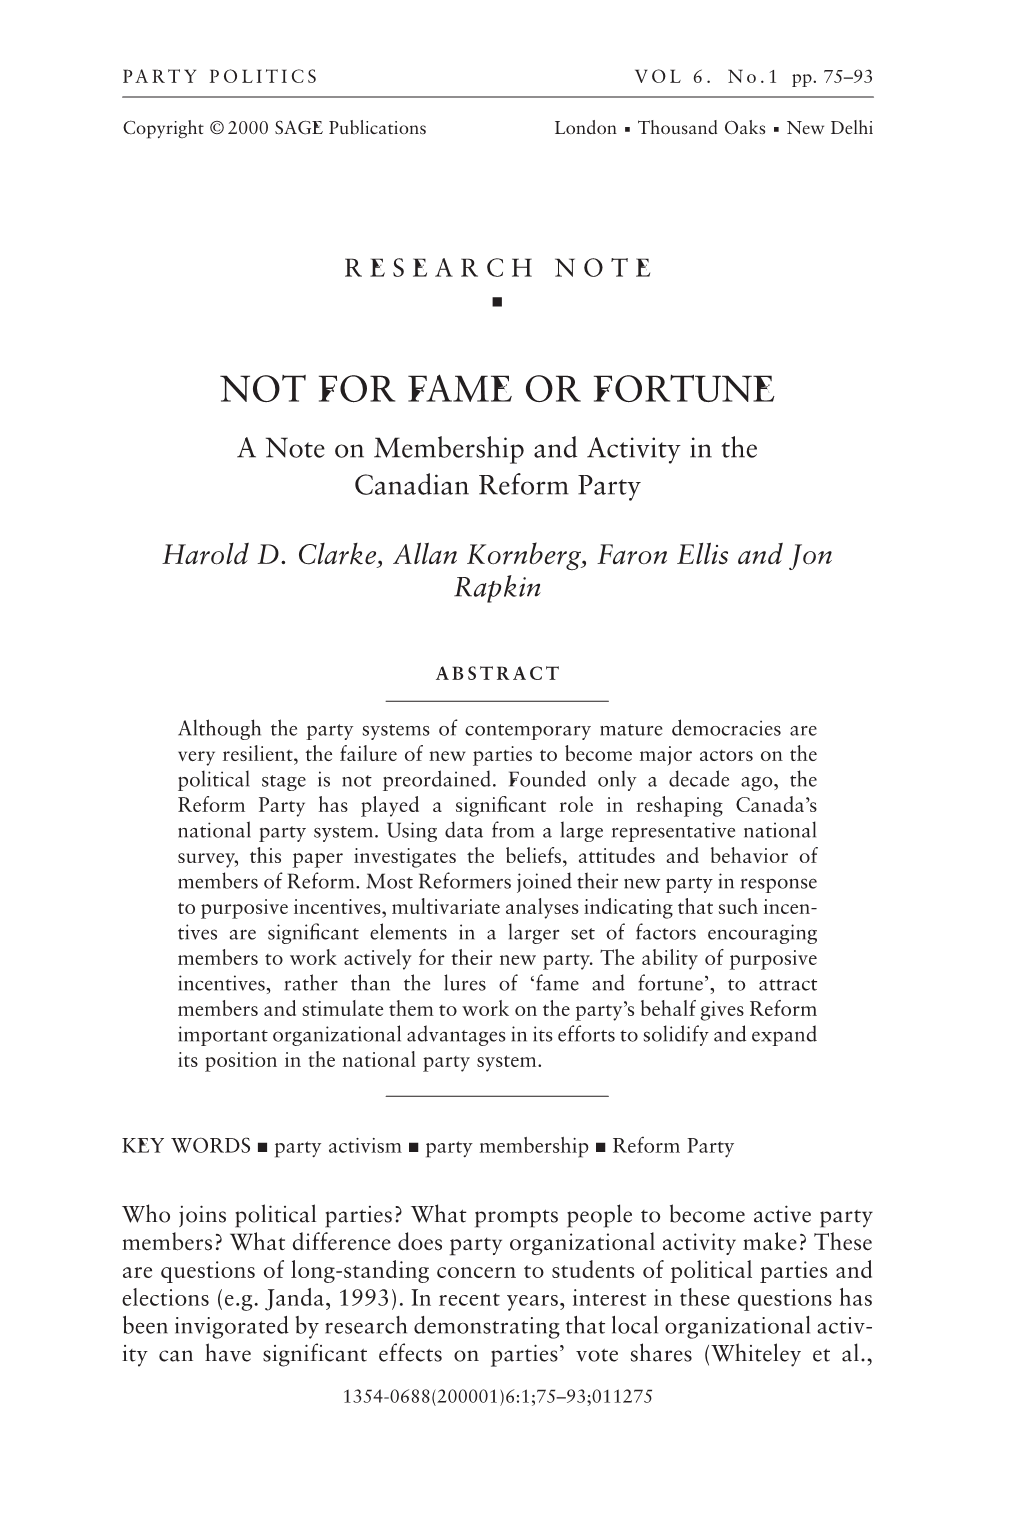 NOT for FAME OR FORTUNE a Note on Membership and Activity in the Canadian Reform Party